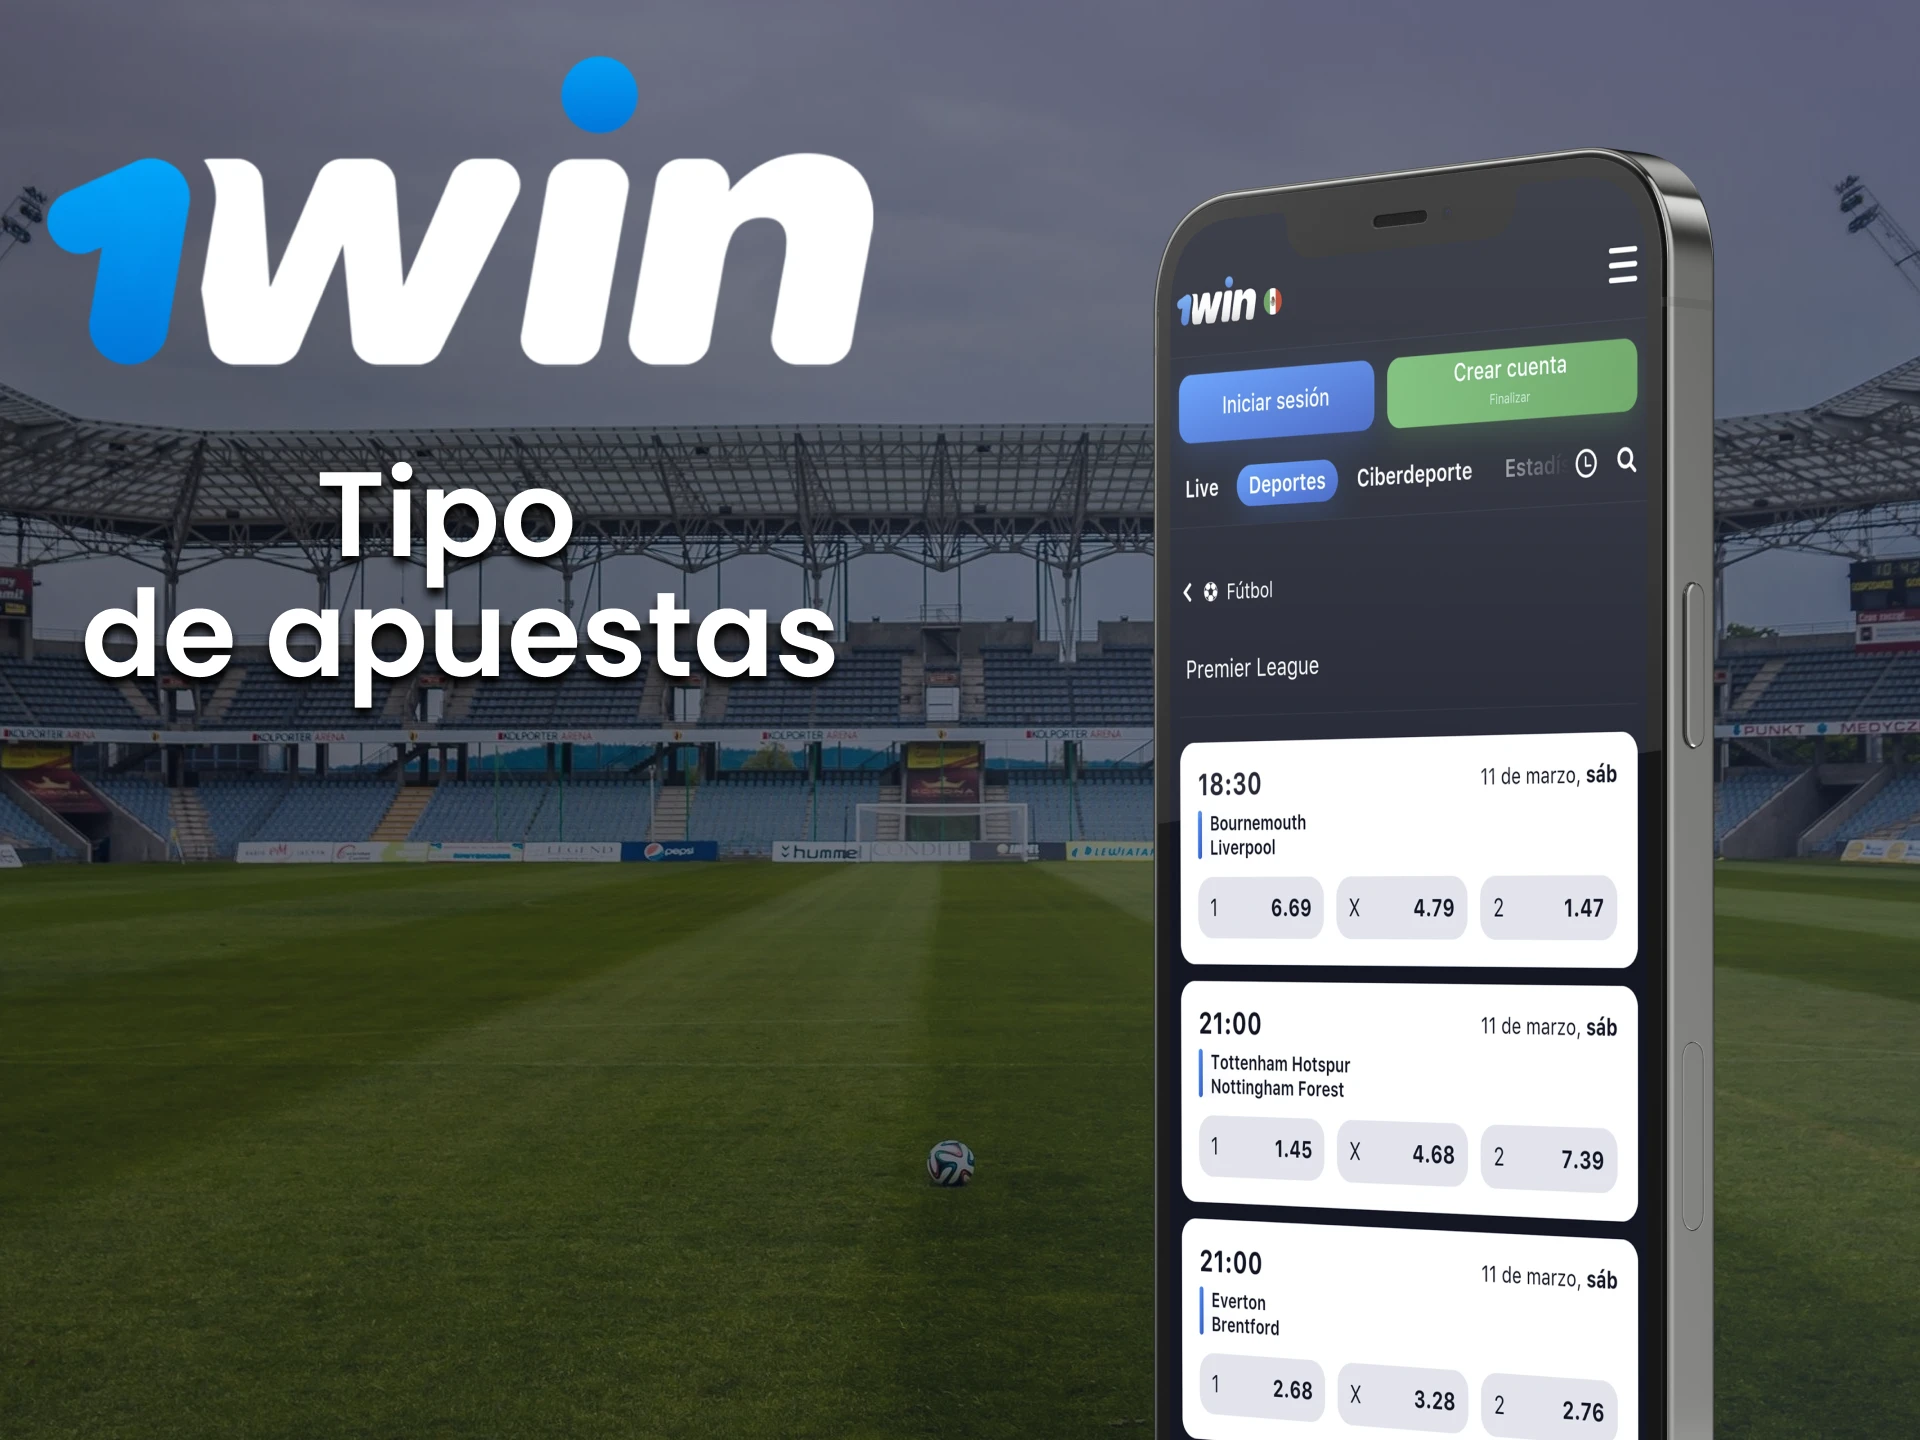 Select the type of bet on the match in the 1win app.